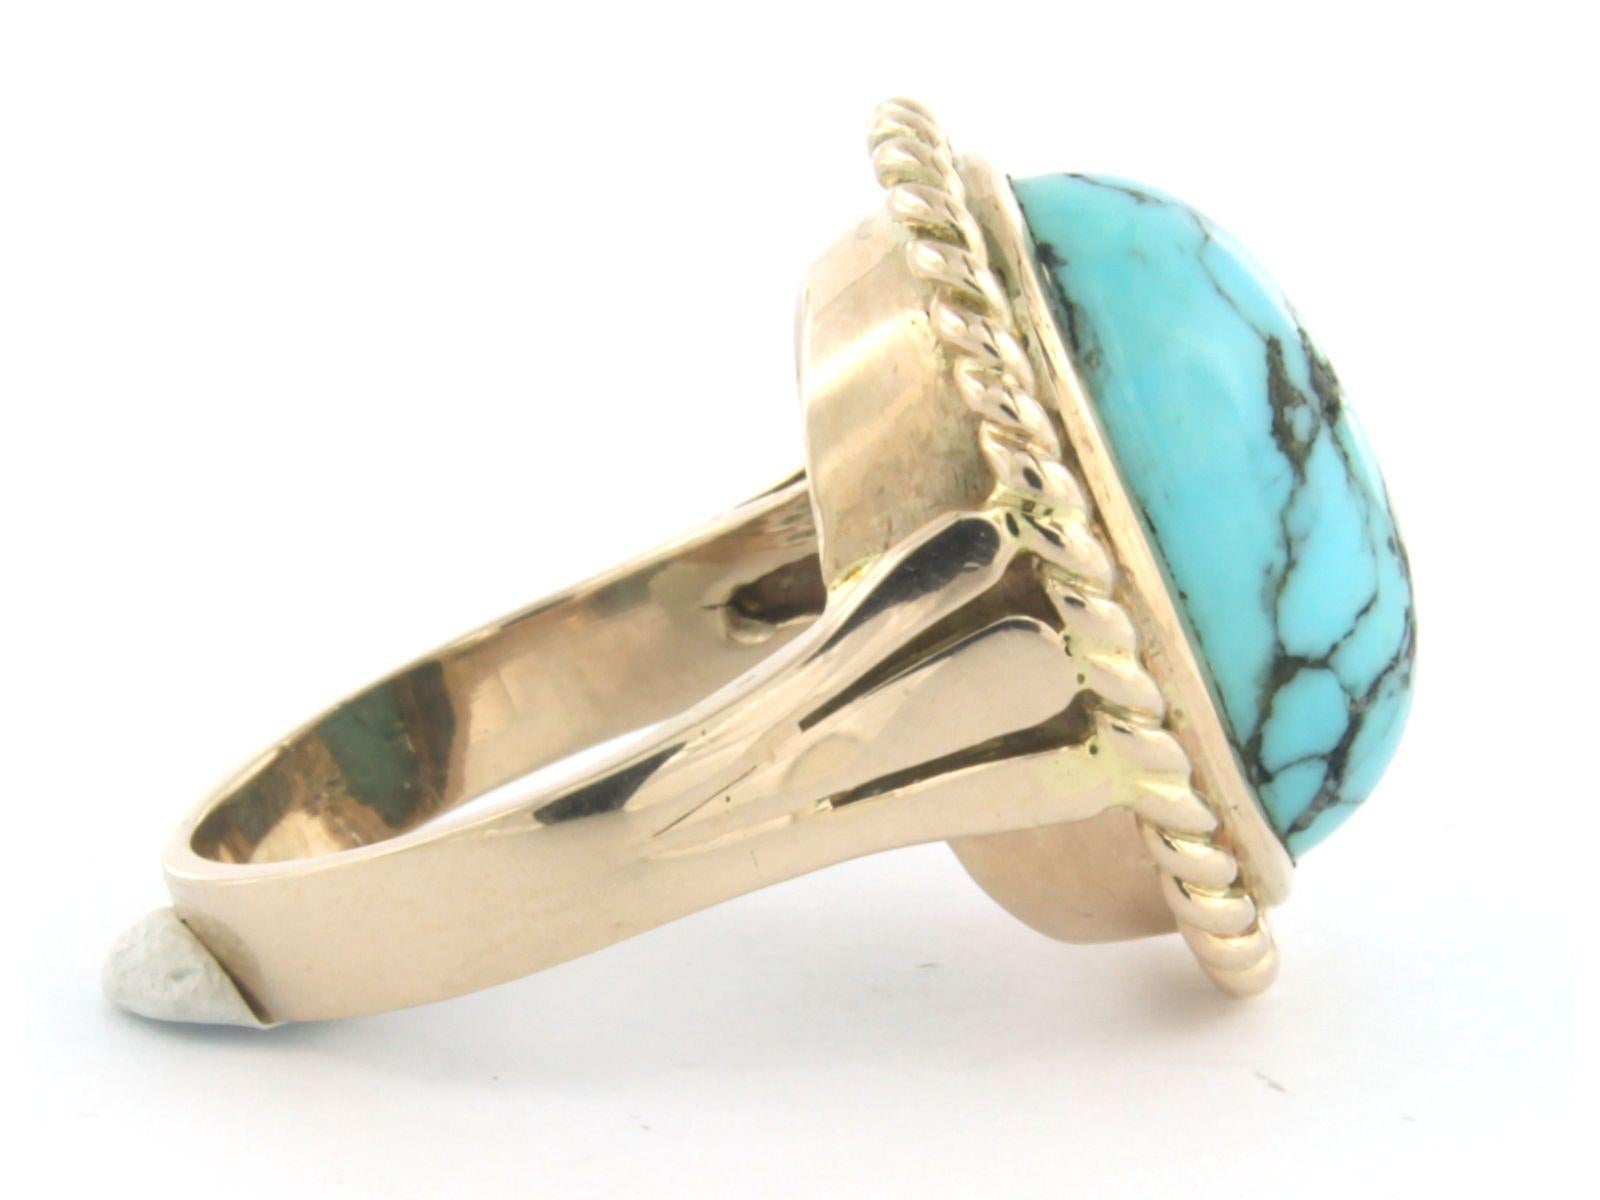 Retro 14k pink gold ring set with turquoise - ring size US. 8.5 - EU. 18.5 (58)  For Sale